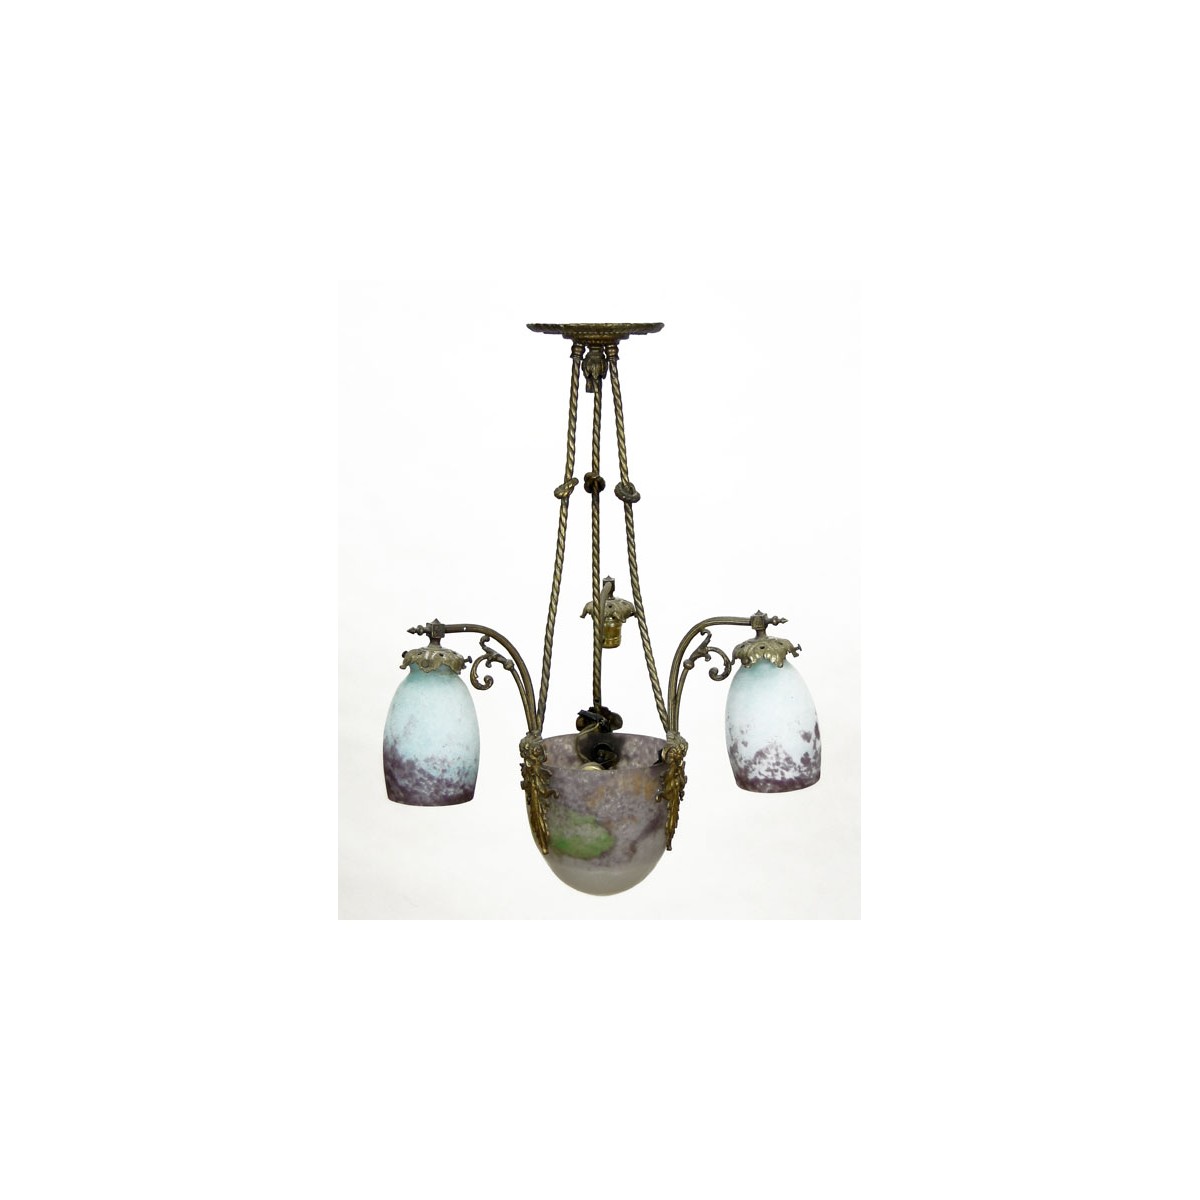 Early 20th Century French Muller-Strasbourg Art Glass and Cast Iron Chandelier.  Glass Signed Mulle